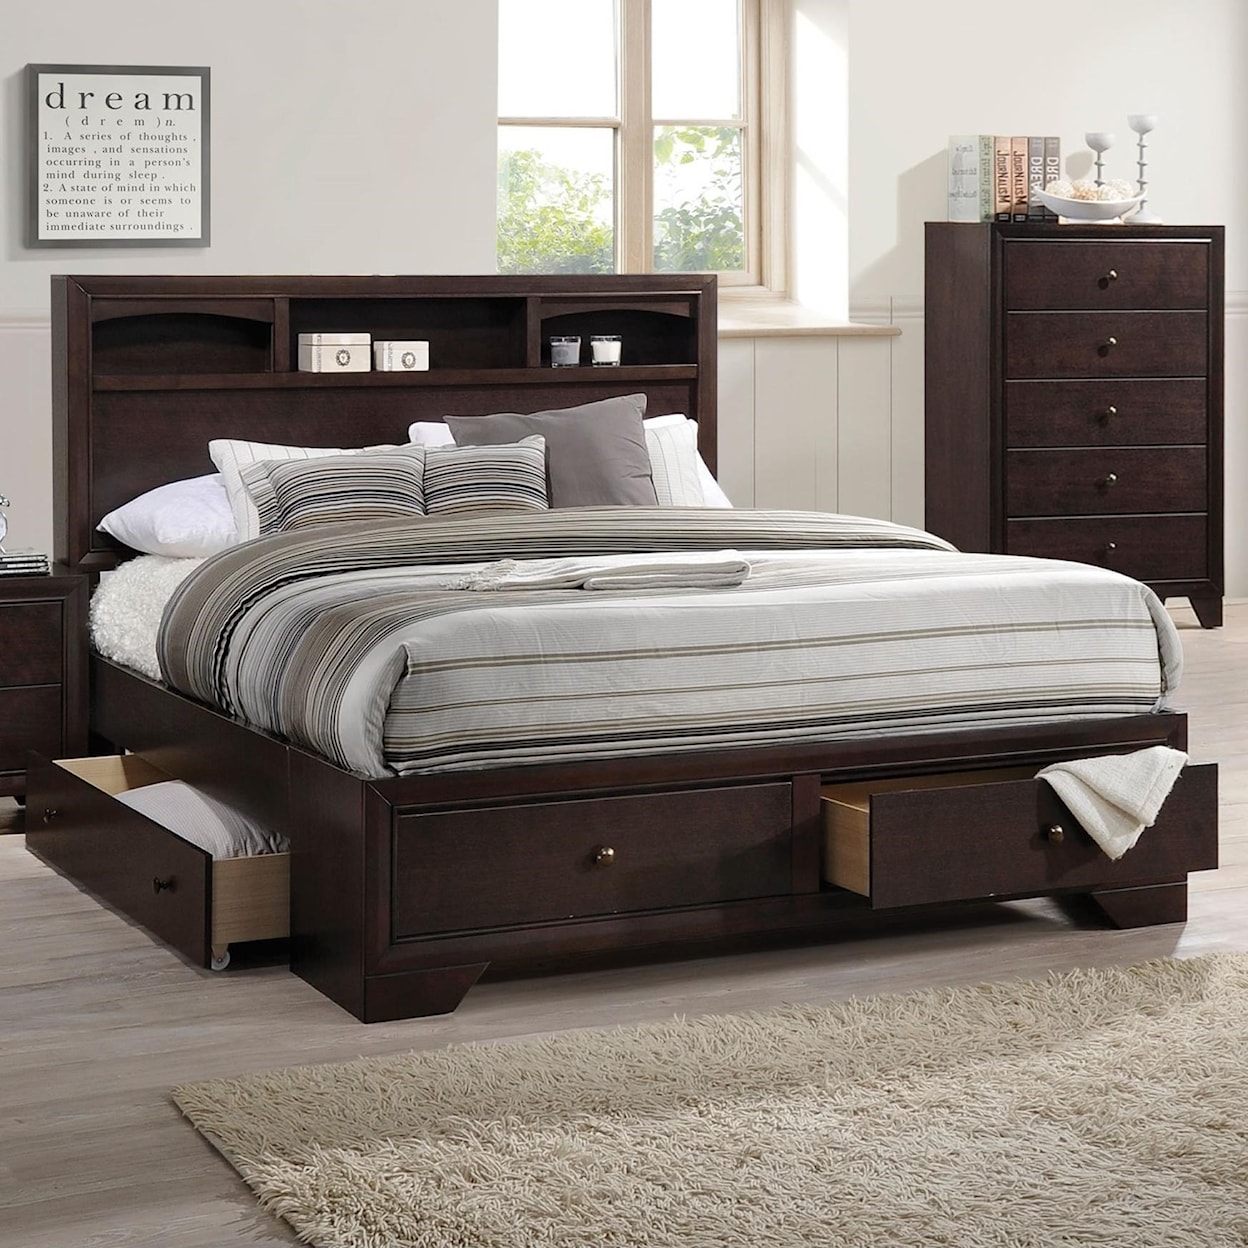 Acme Furniture Madison II Queen Bed w/Storage